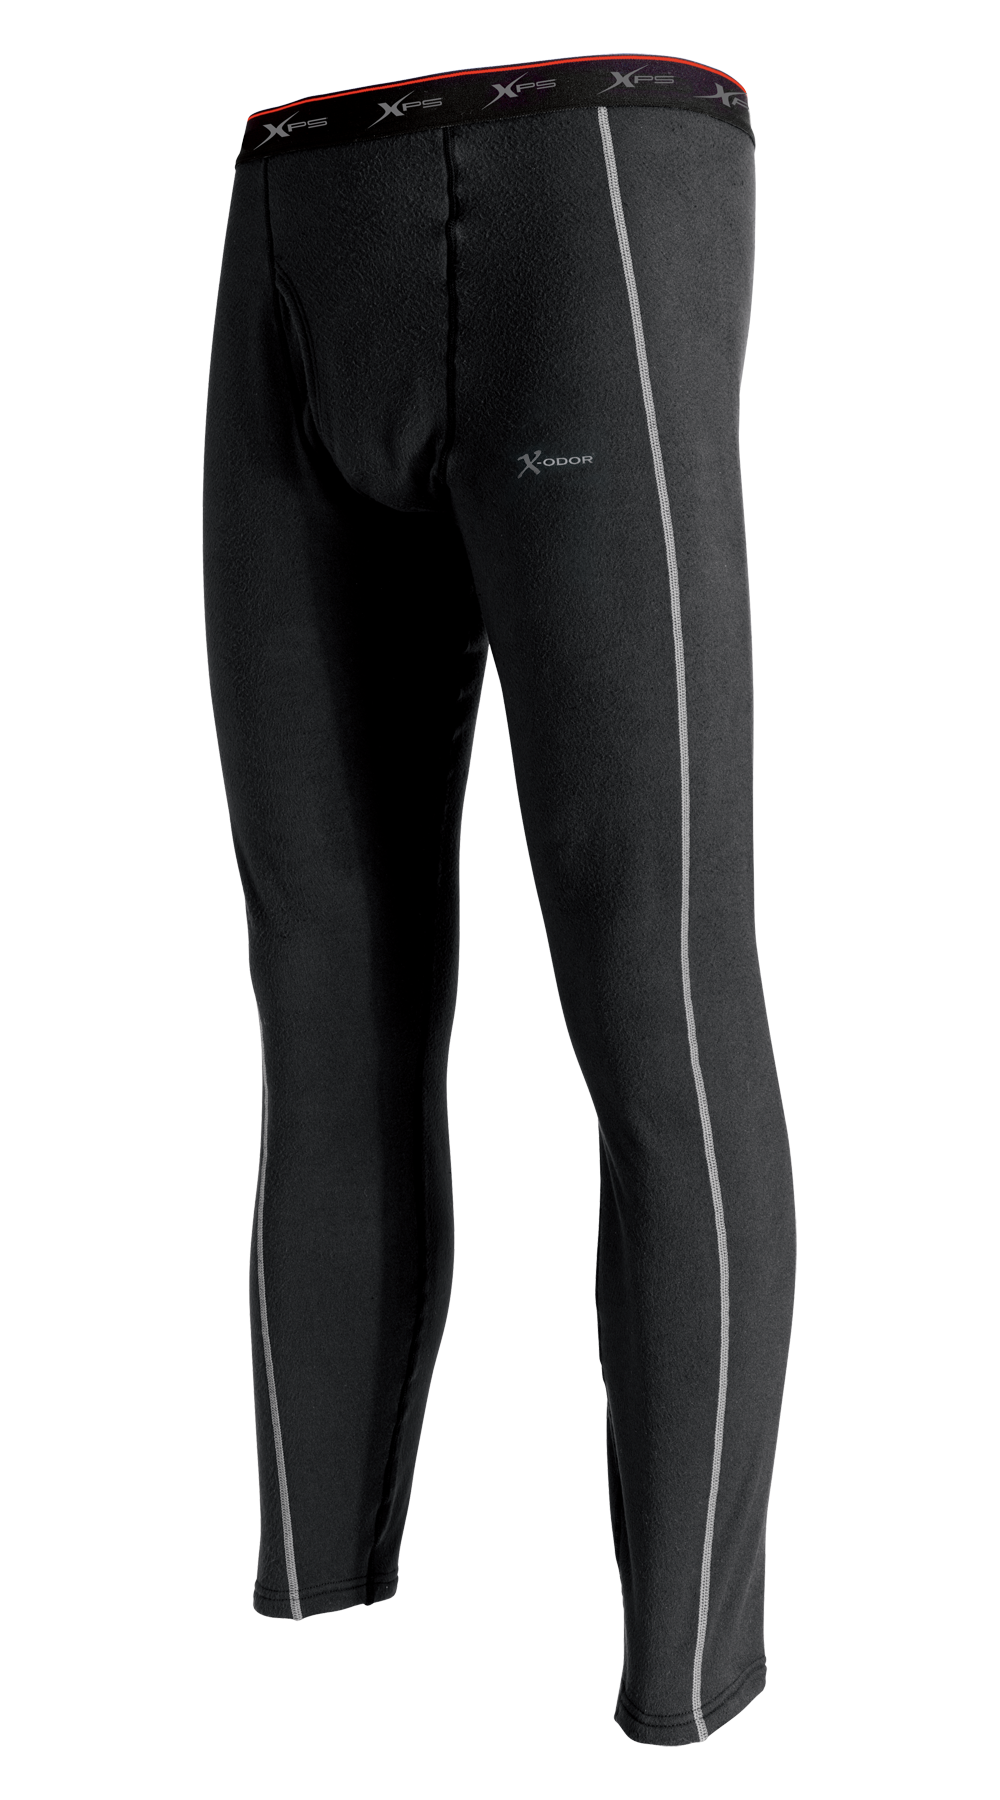 Under Armour - Women's ColdGear 4.0 Leggings - Discounts for Veterans, VA  employees and their families!